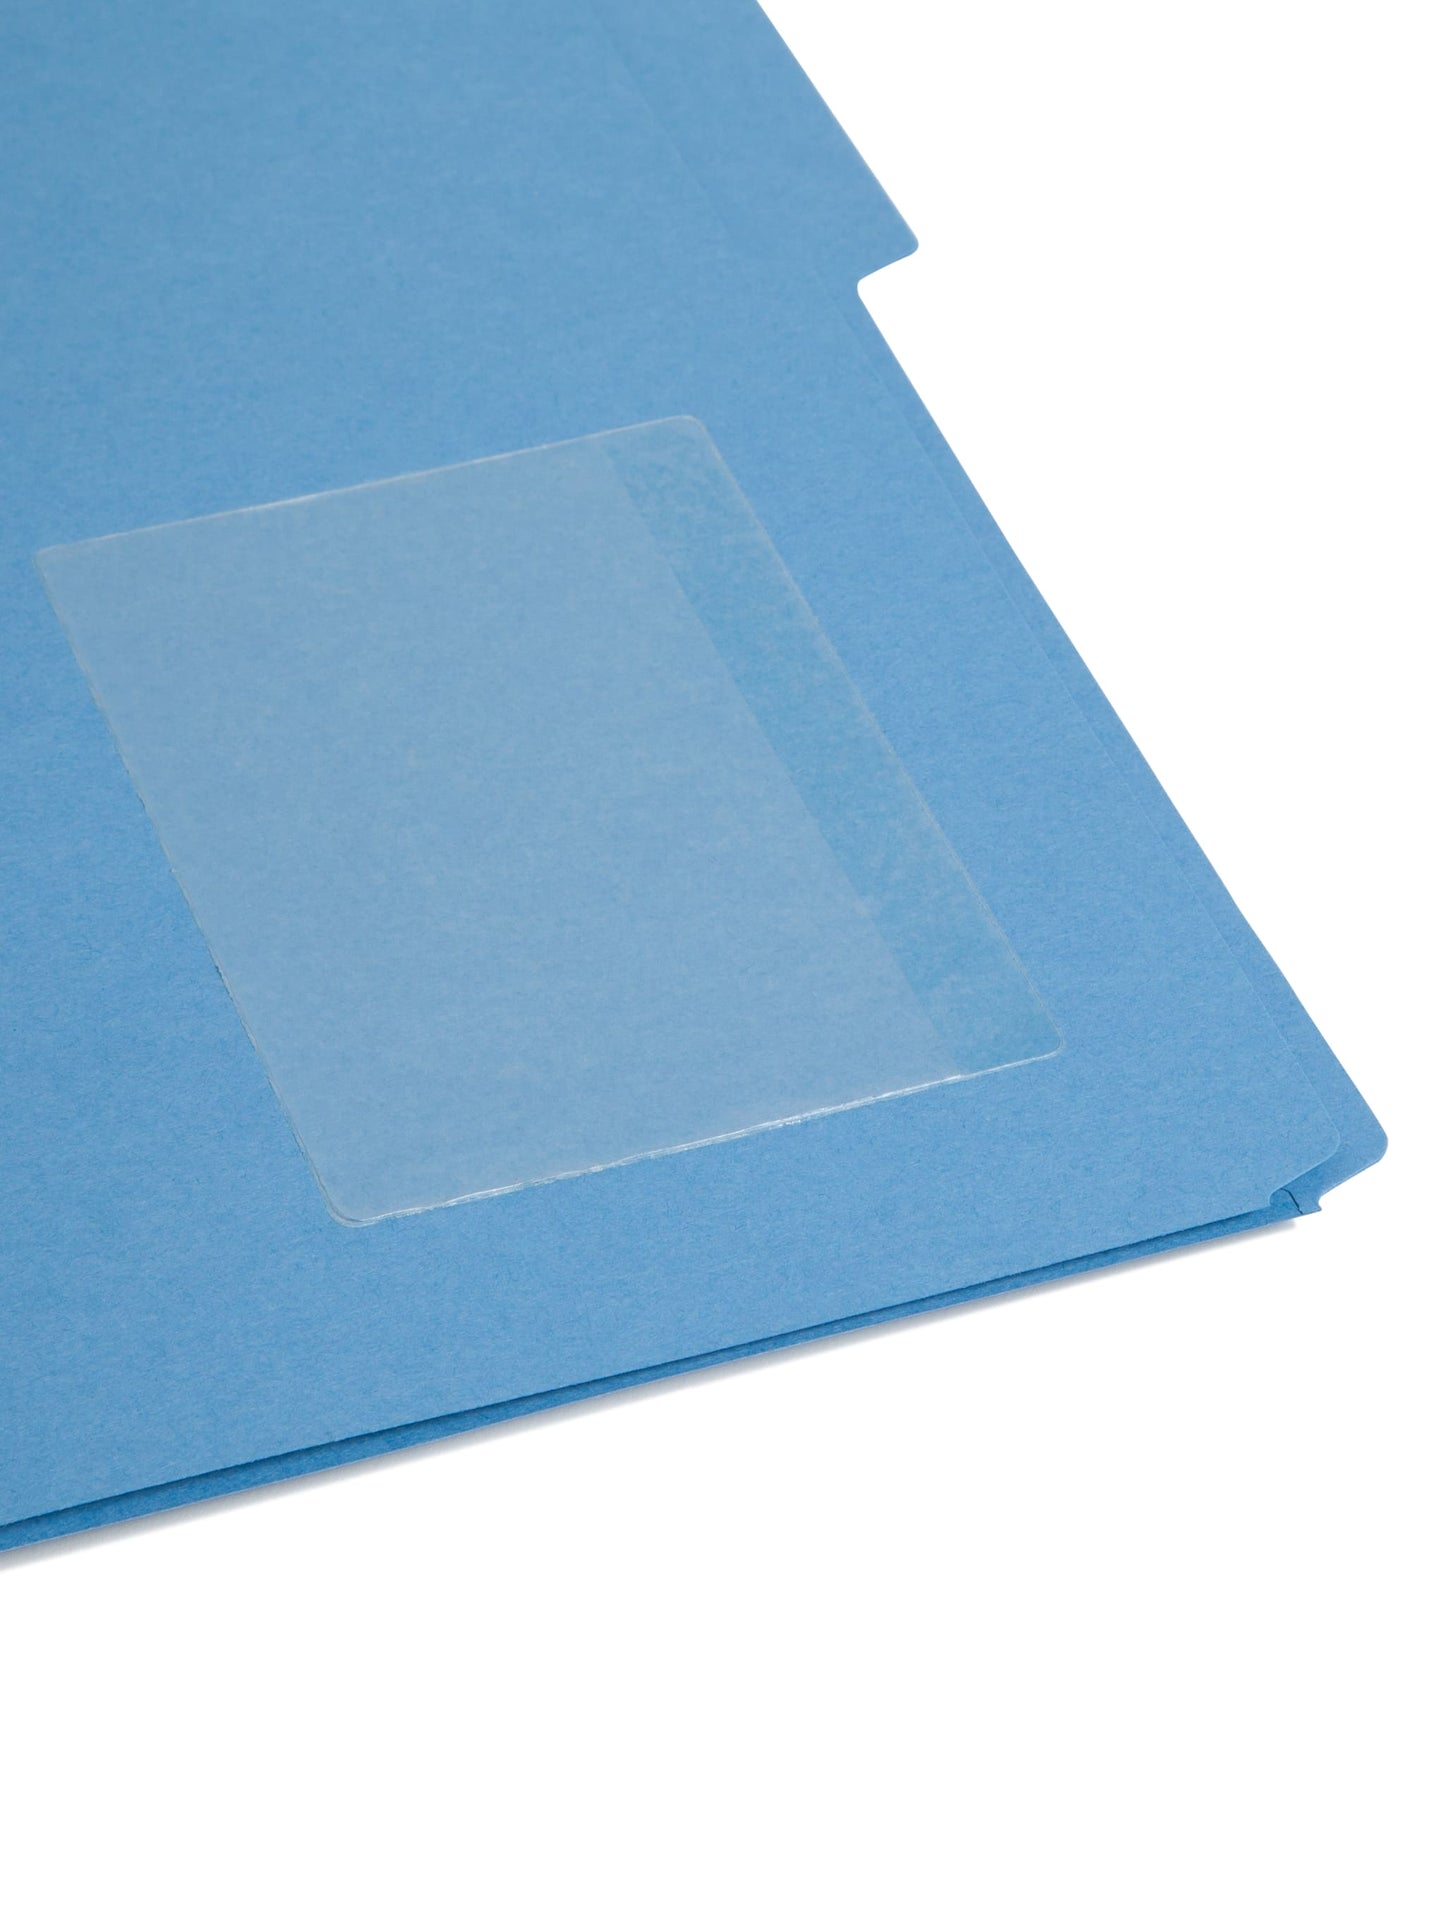 Self-Adhesive Poly Pockets, Clear Color, 5" X 3" Size, Set of 100, 086486681537